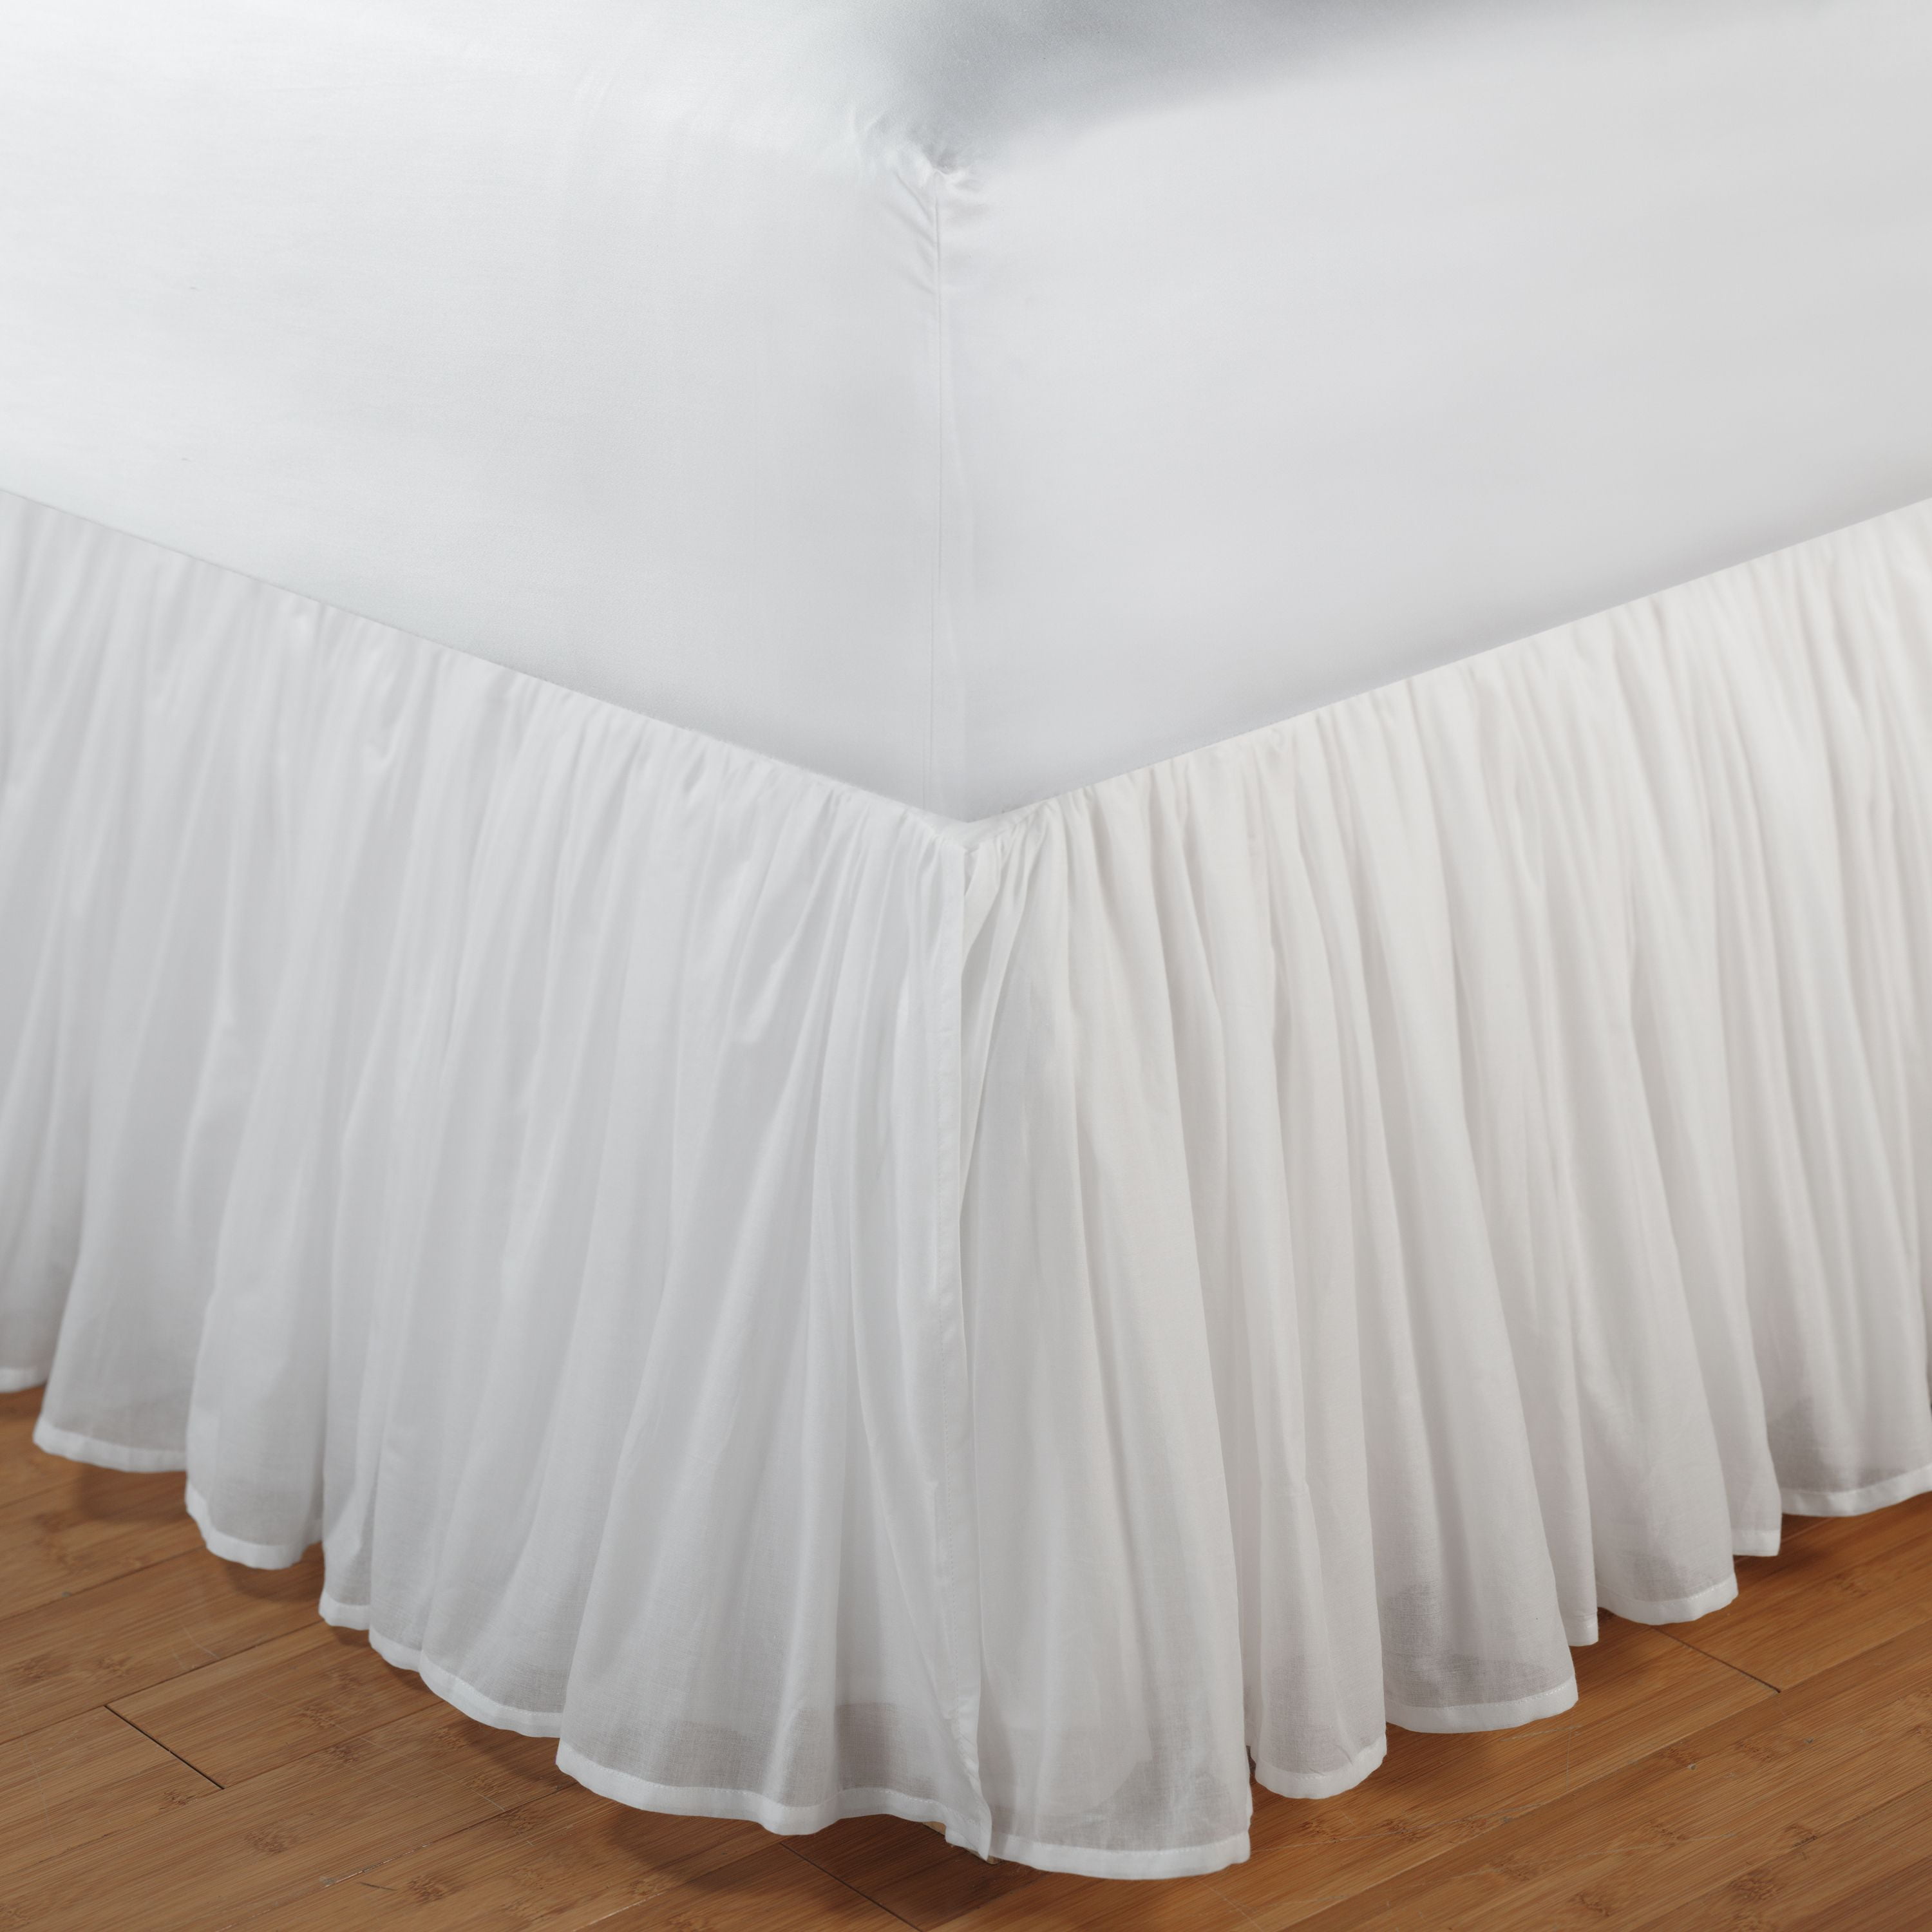 Details about   One Qty Bed Skirt All Sizes AU Collection 100% Cotton 1000 TC White Solid 